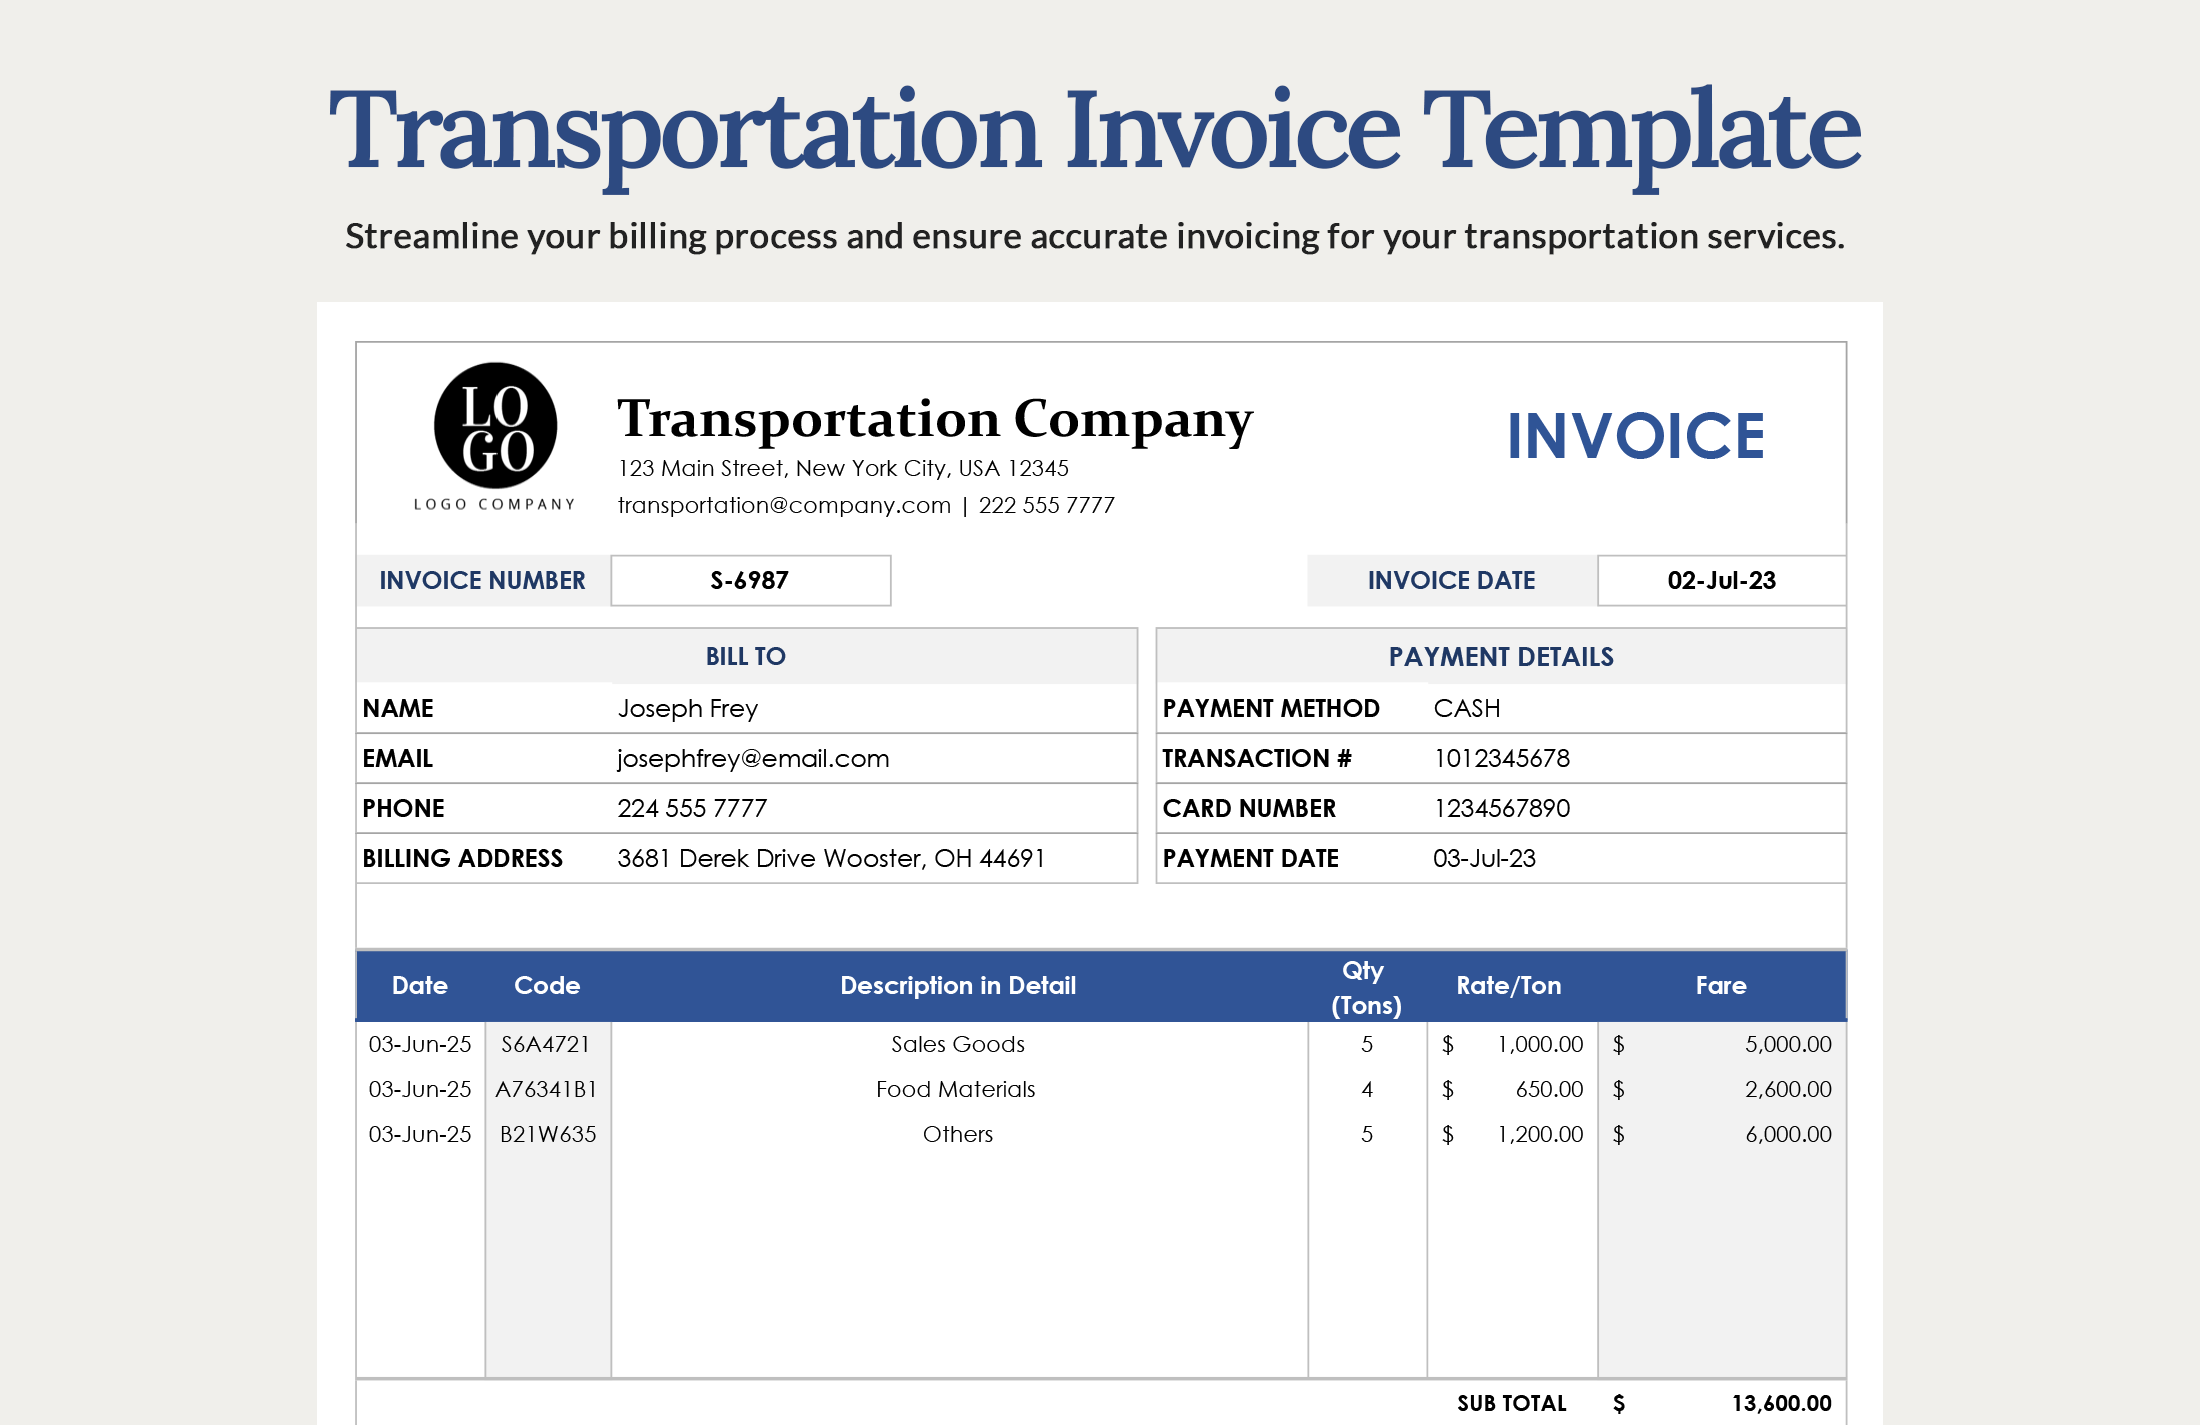 Transportation Invoice Template Download in Word, Google Docs, Excel